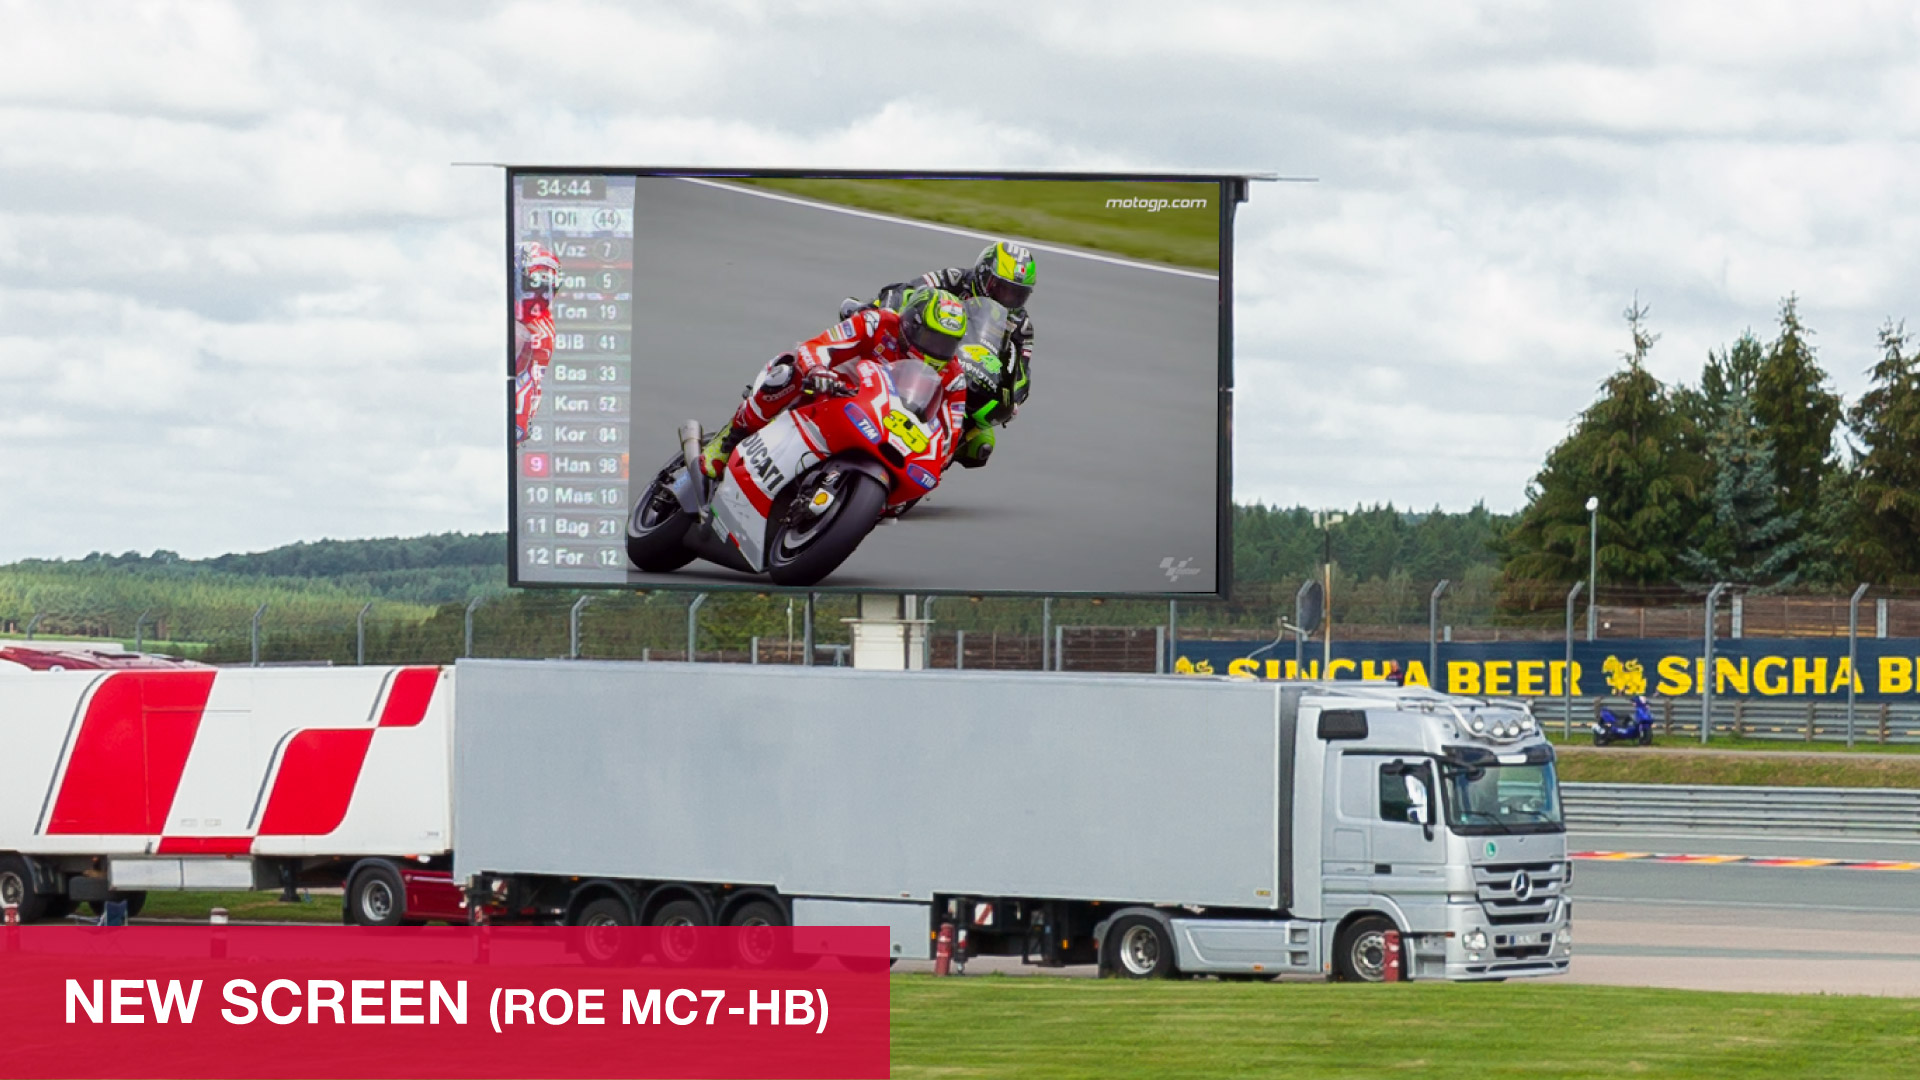 PRG´s 50m² LED truck now has a new, even better screen (ROE MC7-HB)